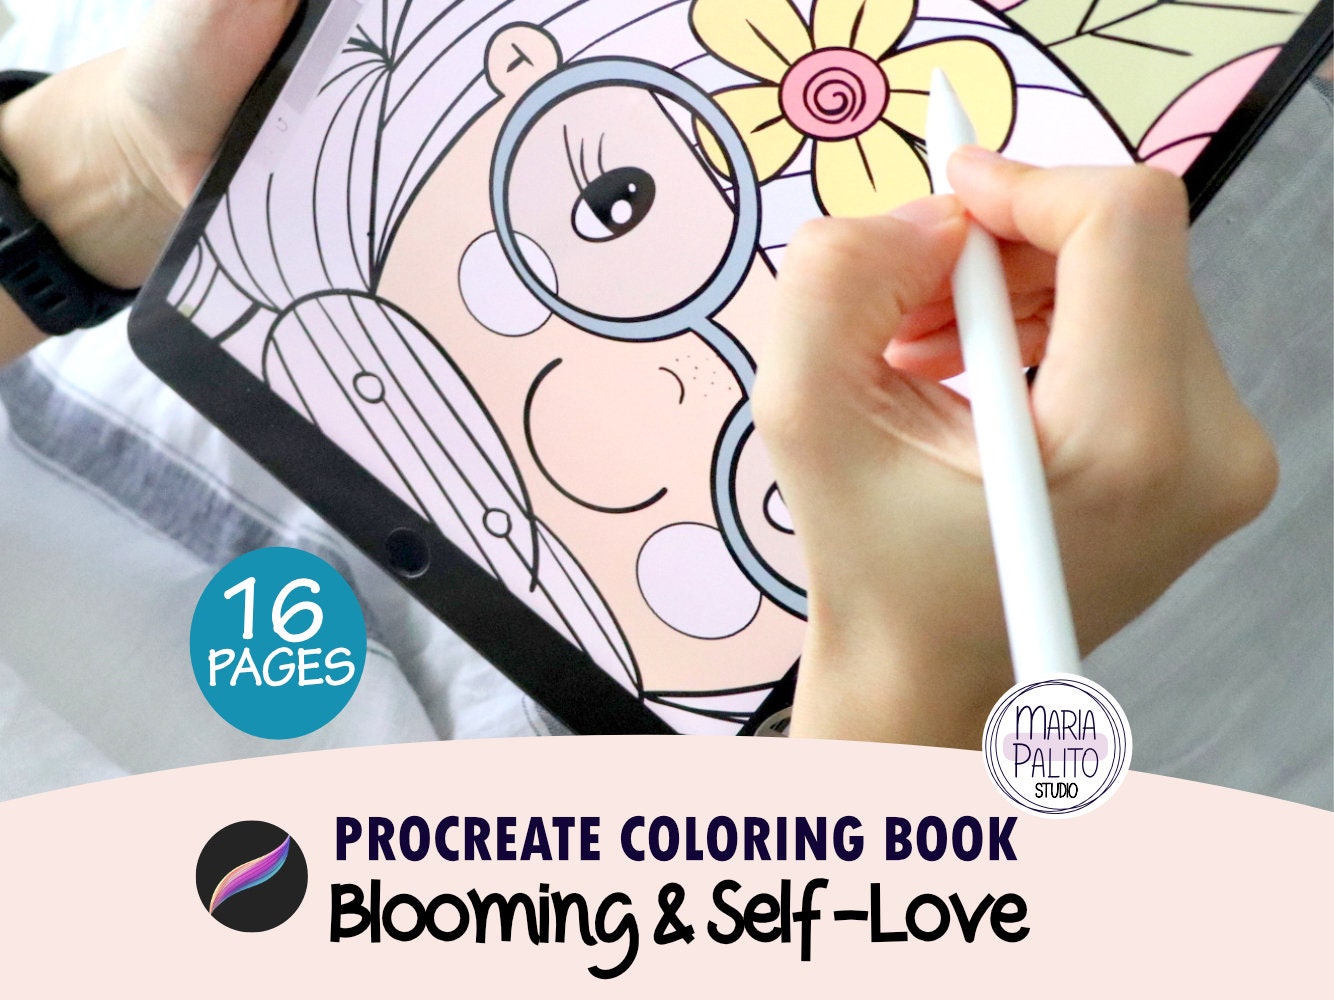 No Self-Hate: You're Too Cute for That: Calming Coloring Pages by the  Latest Kate (Mosaic Art Anxiety Coloring Book) (Paperback)